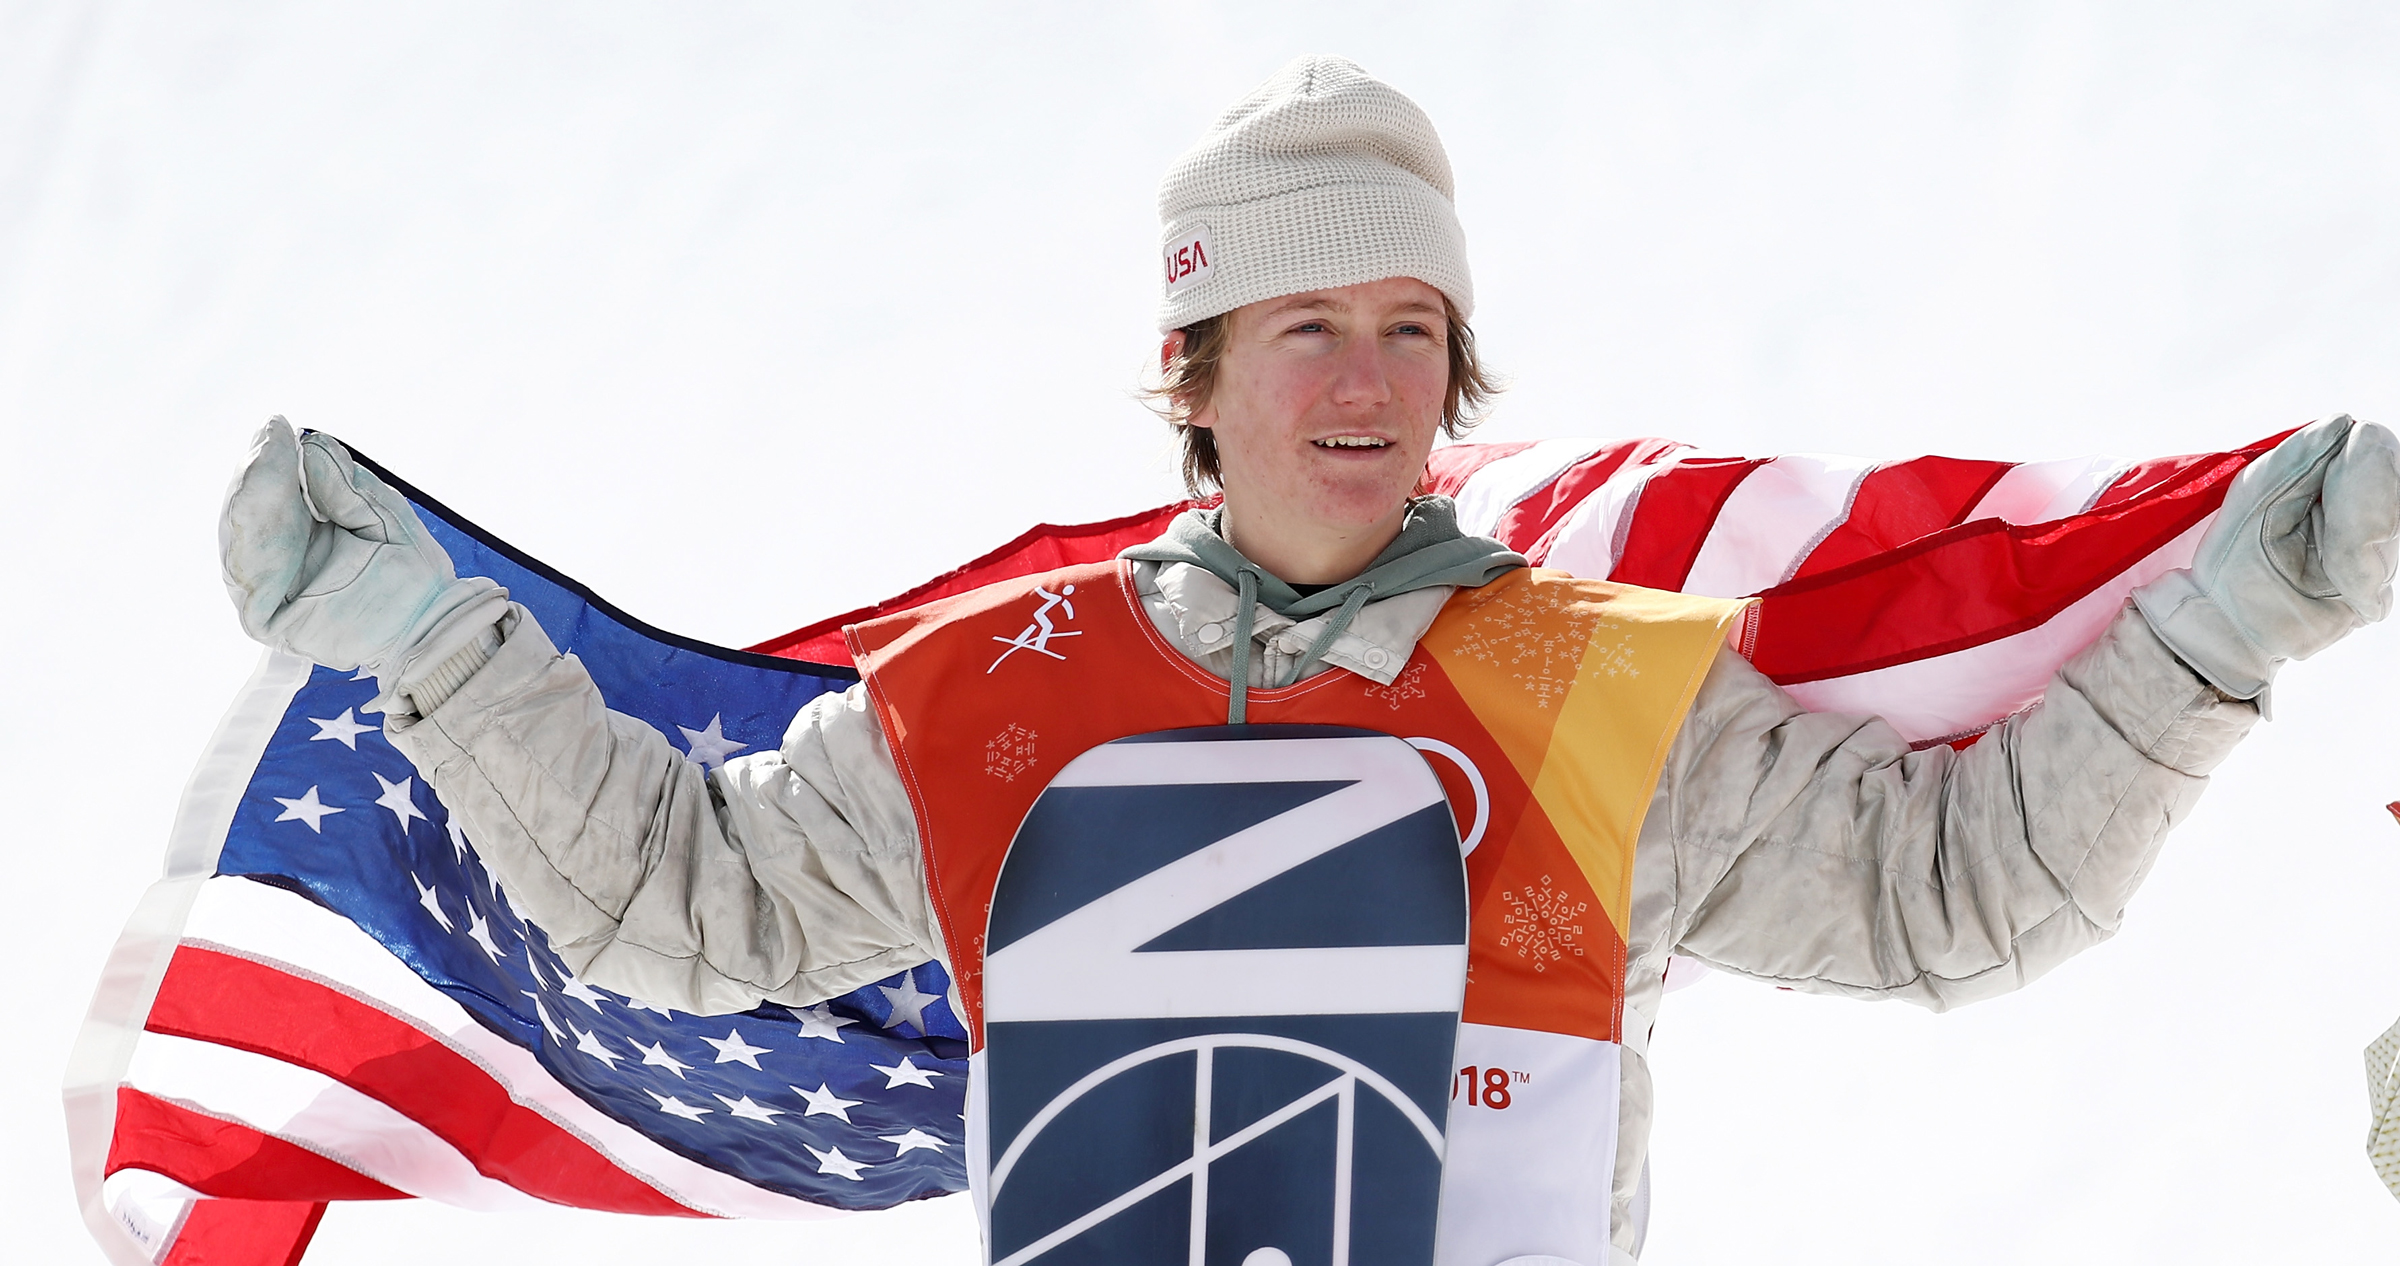 Red Gerard won the gold medal in slopestyle snowboarding Sunday at the 2018 Olympic Winter Games at Phoenix Snow Park in Pyeongchang-gun, South Korea. (Getty Images - Clive Rose)